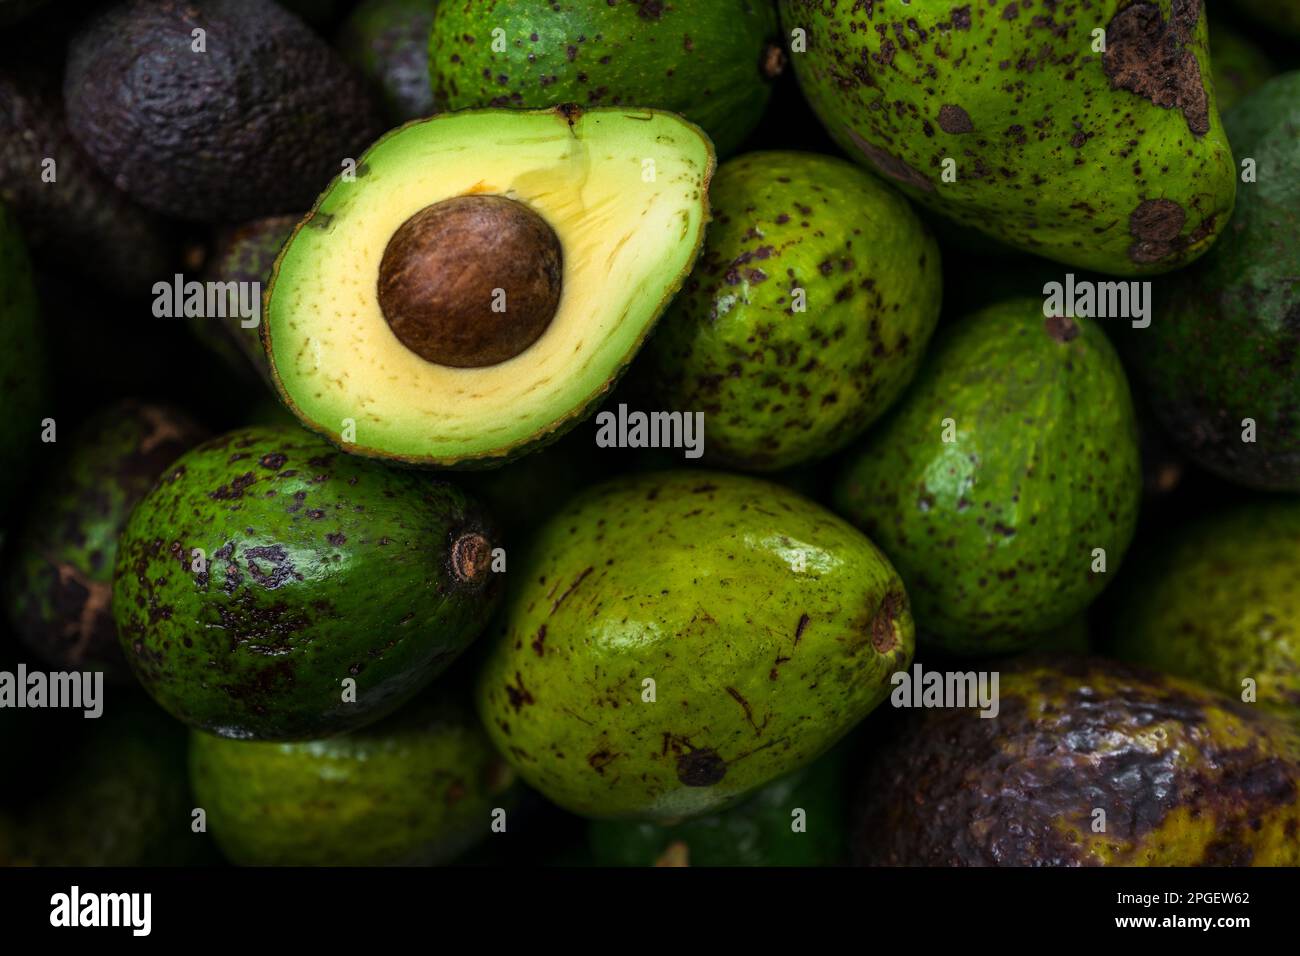 Fresh and ripe avocados, cultivated in local farms, are seen offered for sale in the street market in Armenia, Colombia. Stock Photo